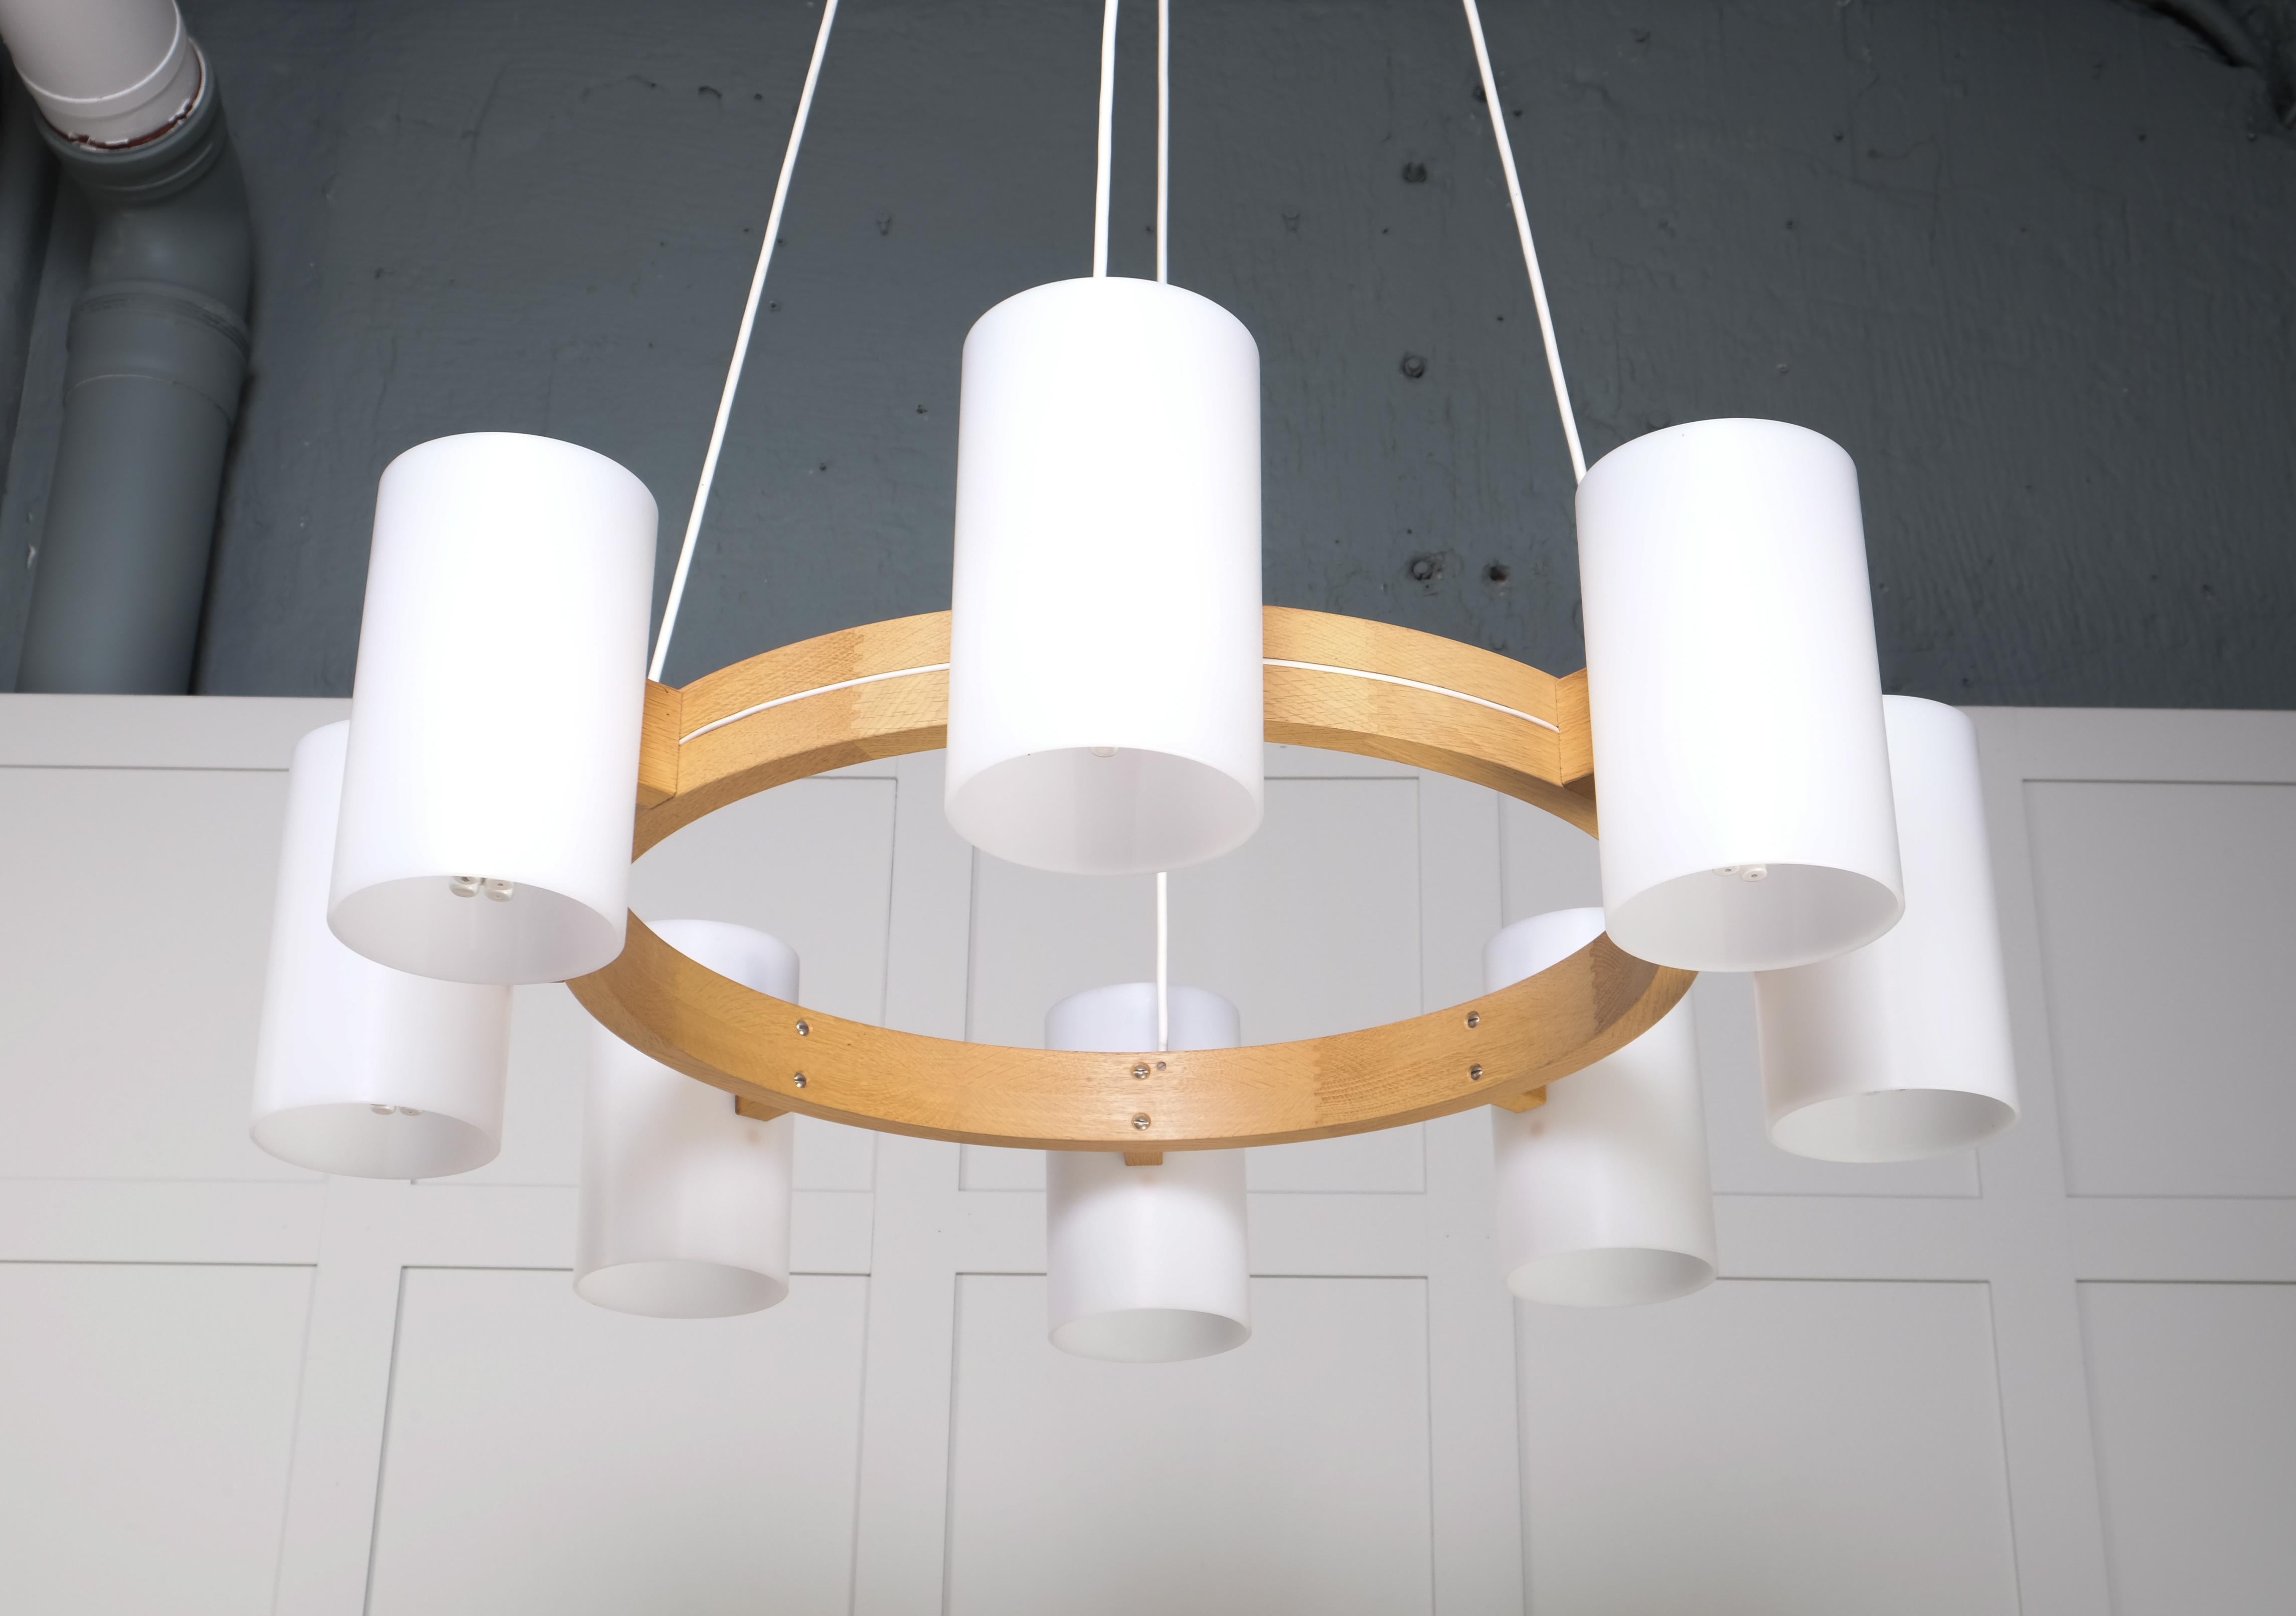 Set of 6 Chandeliers by Uno & Östen Kristiansson for Luxus, 1960s For Sale 7